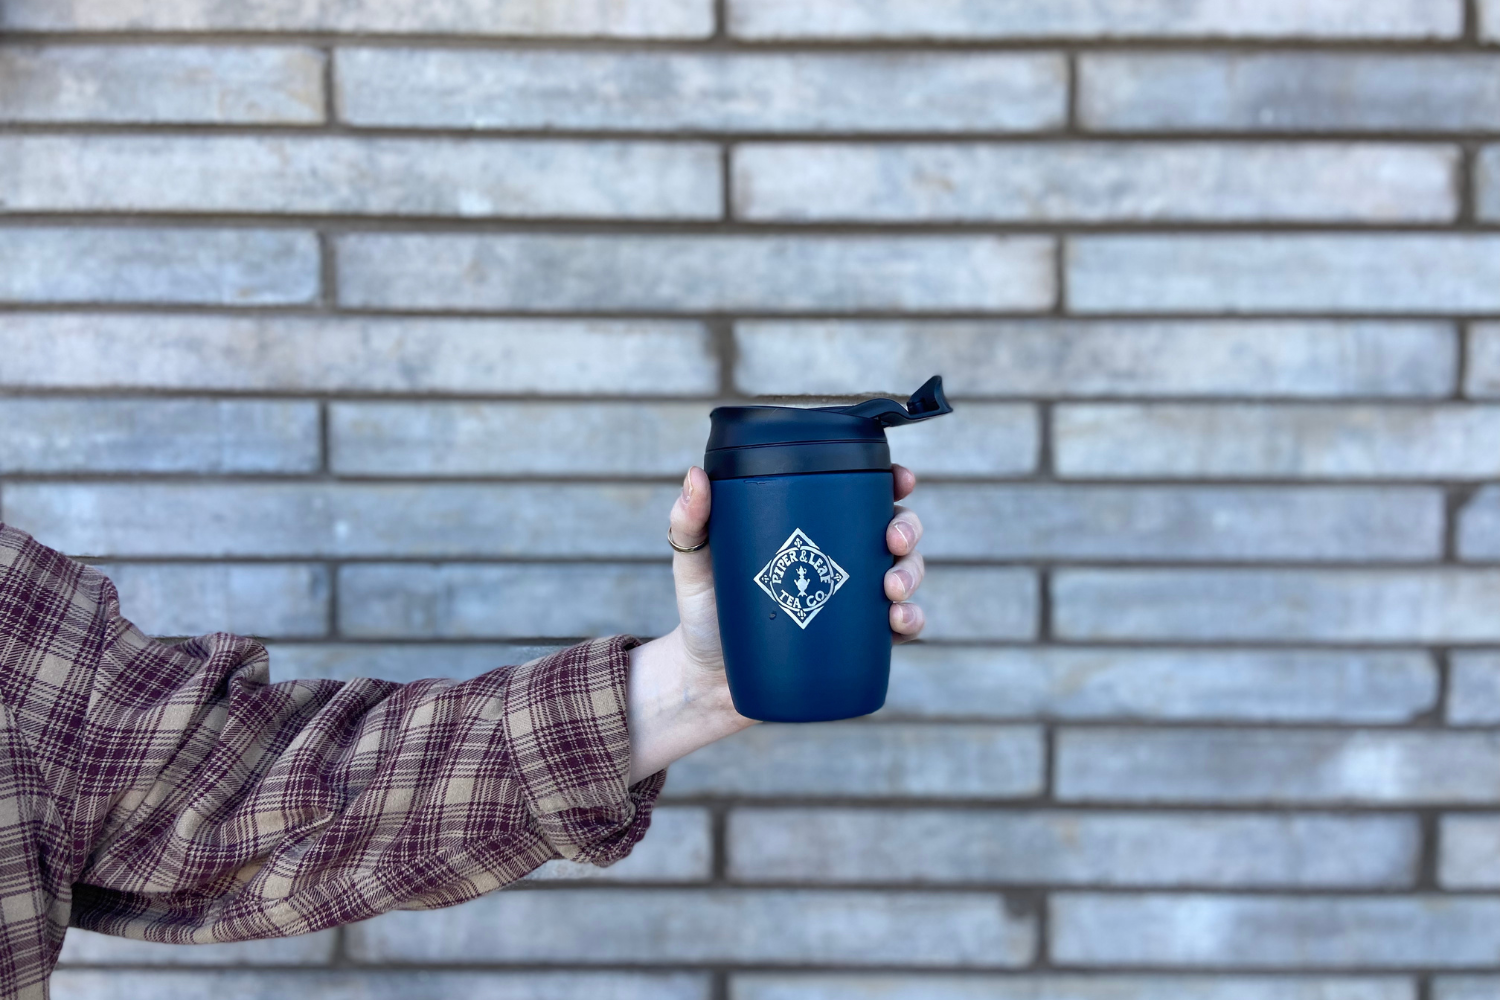 Insulated travel mug being held in front of a brick wall